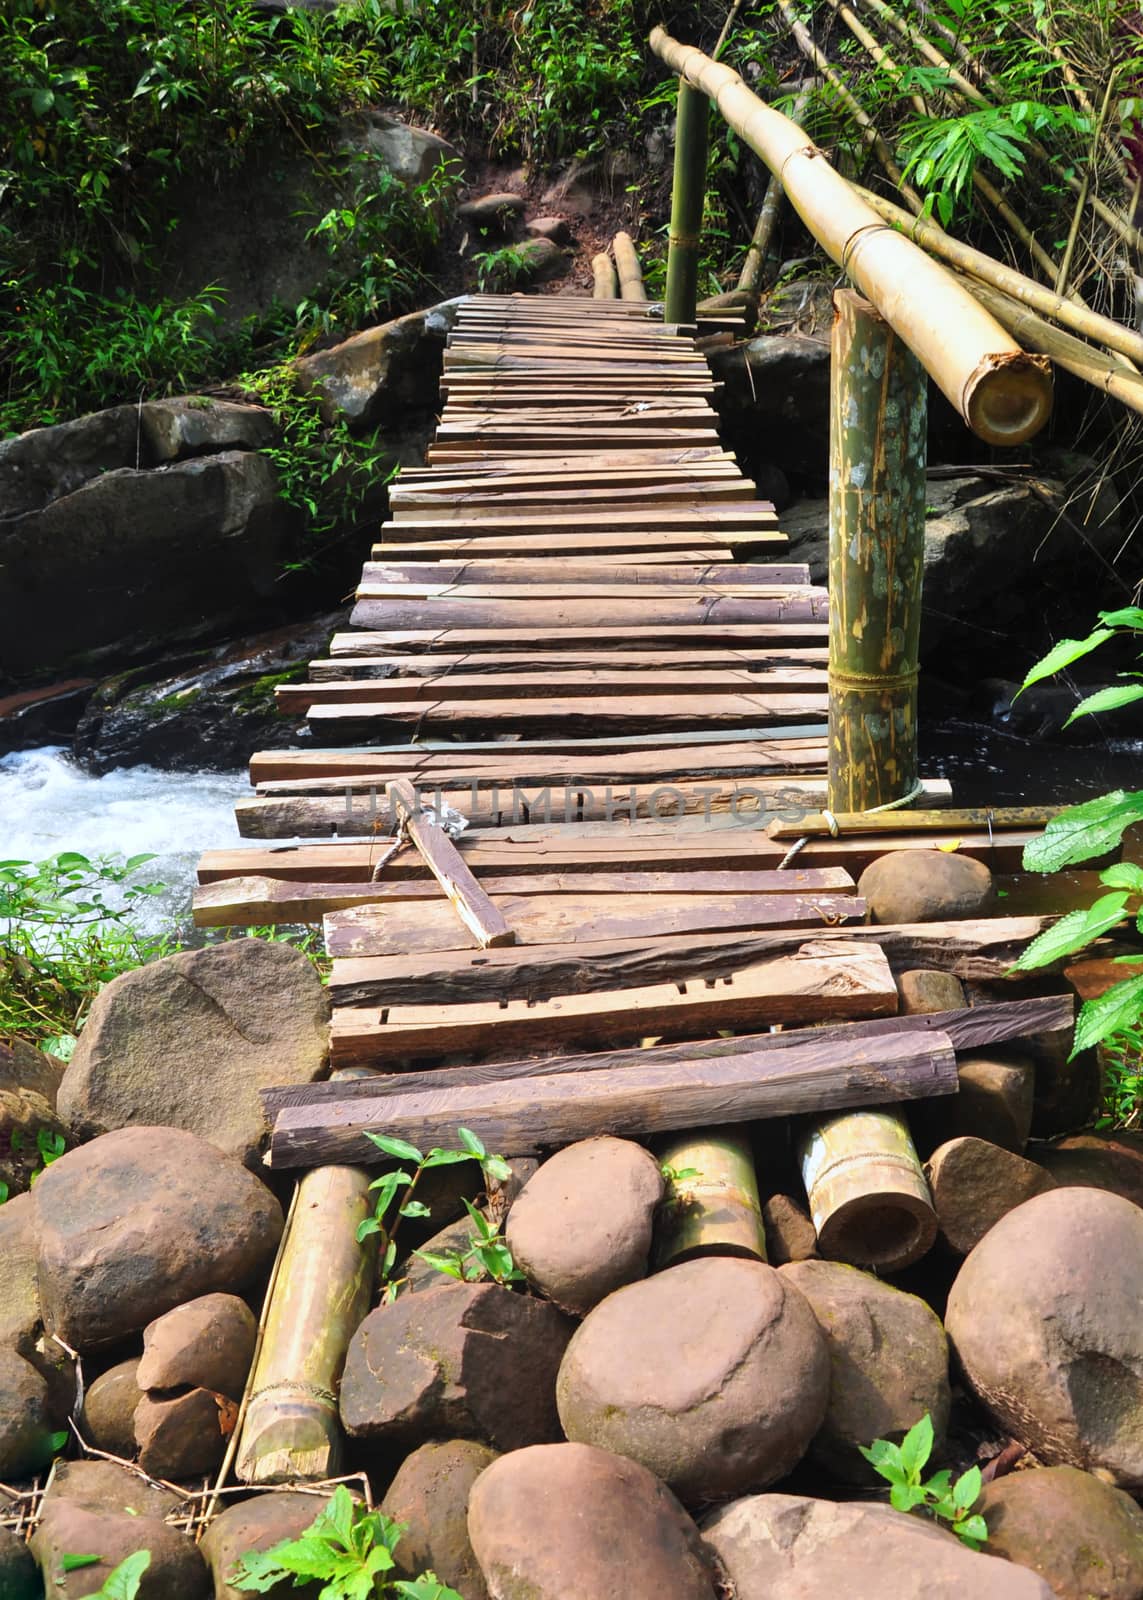 Old wooden bridge across the stream in the forest, Phu Soi Dao National Park, Thailand